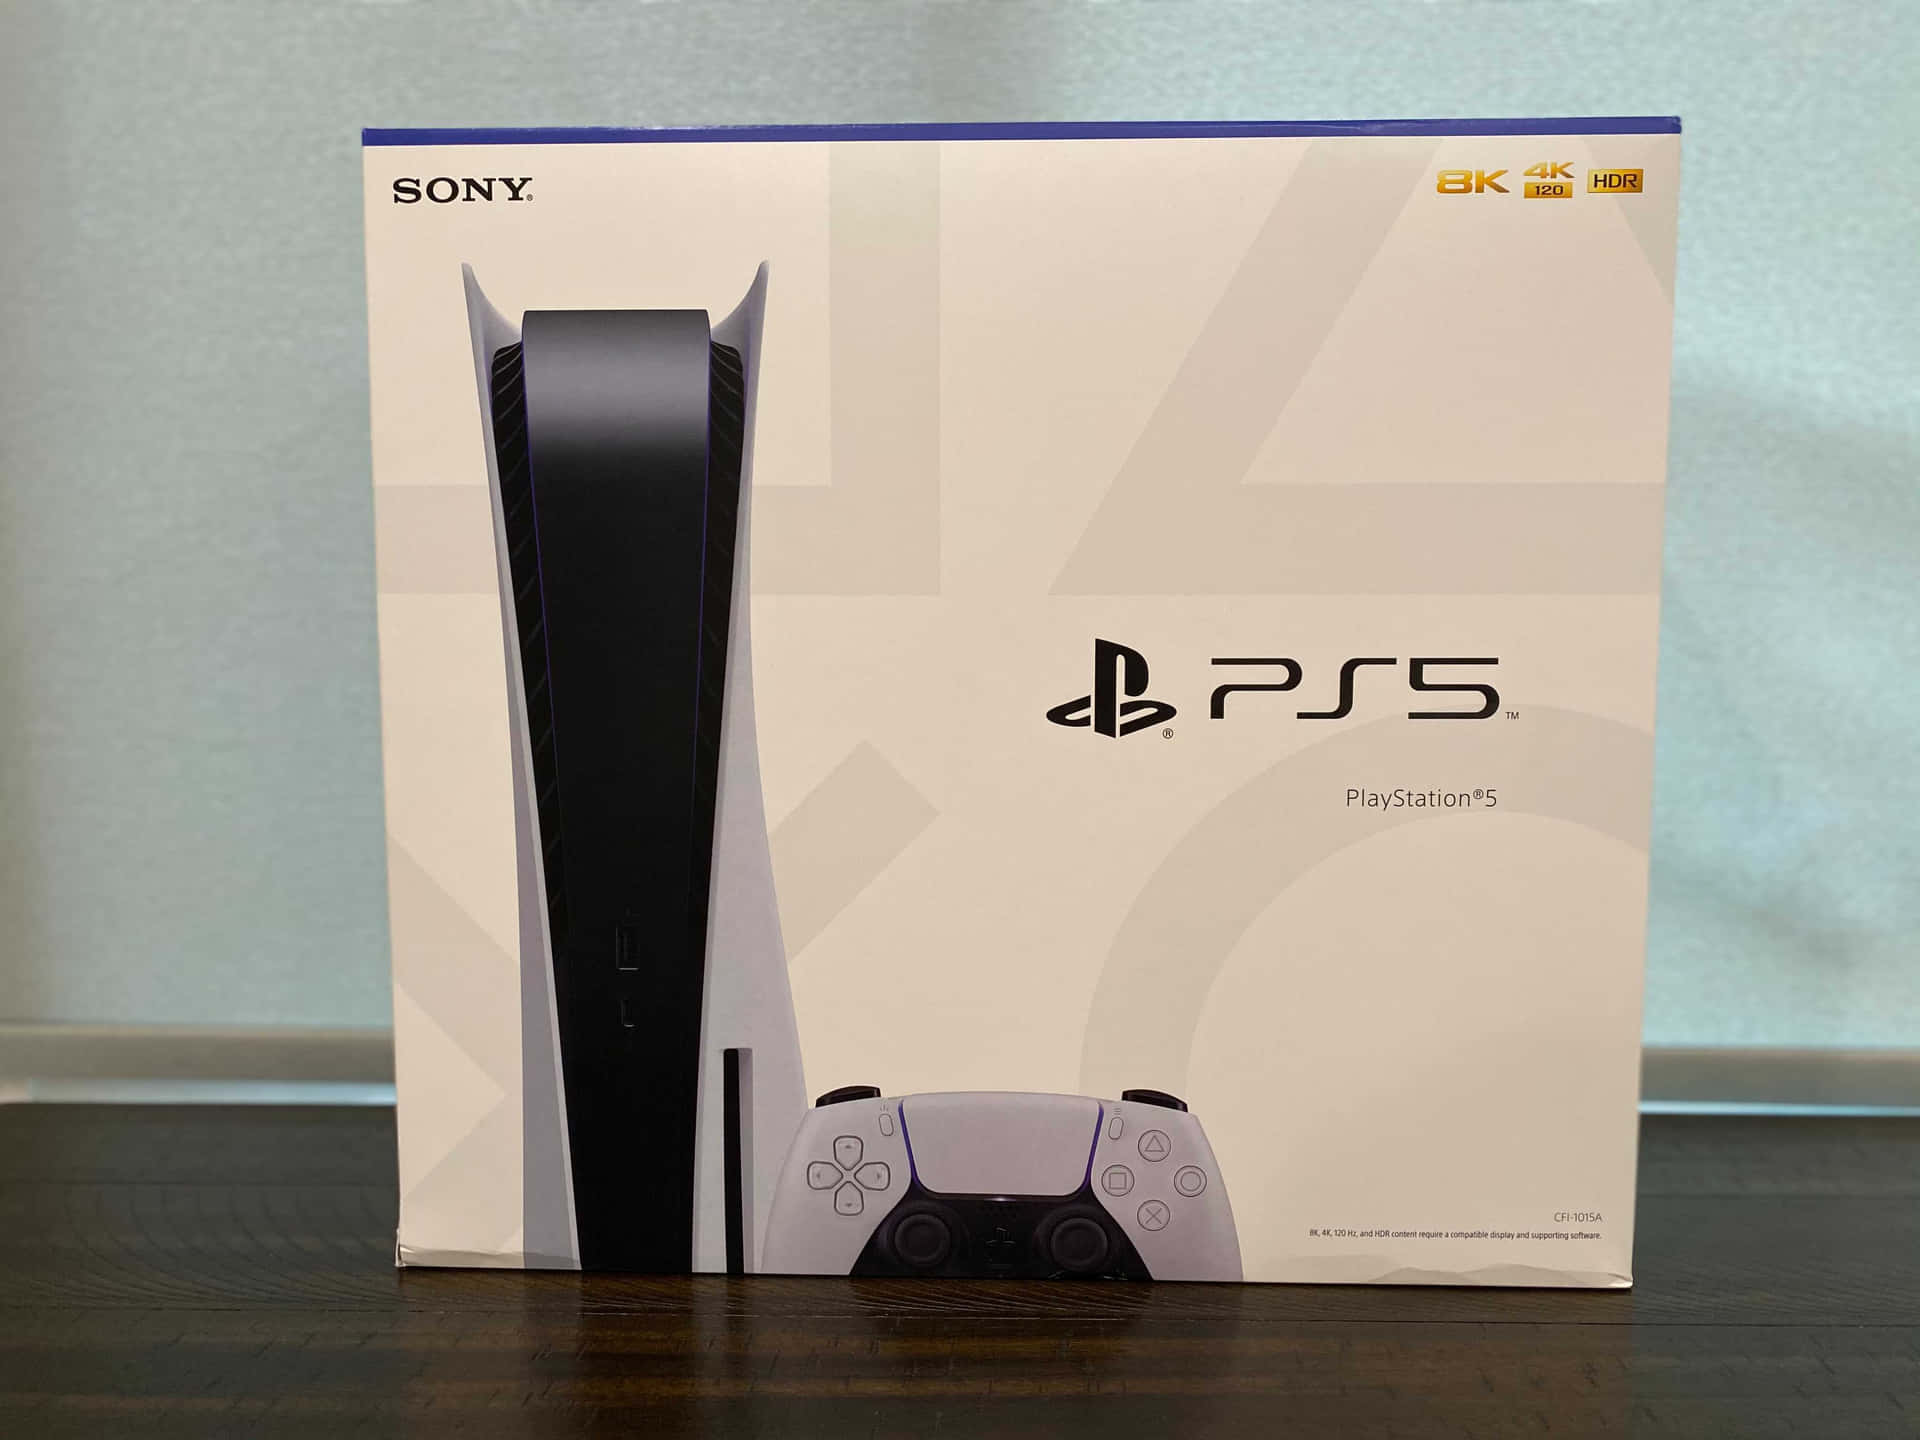 Experience the power of gaming with Playstation 5